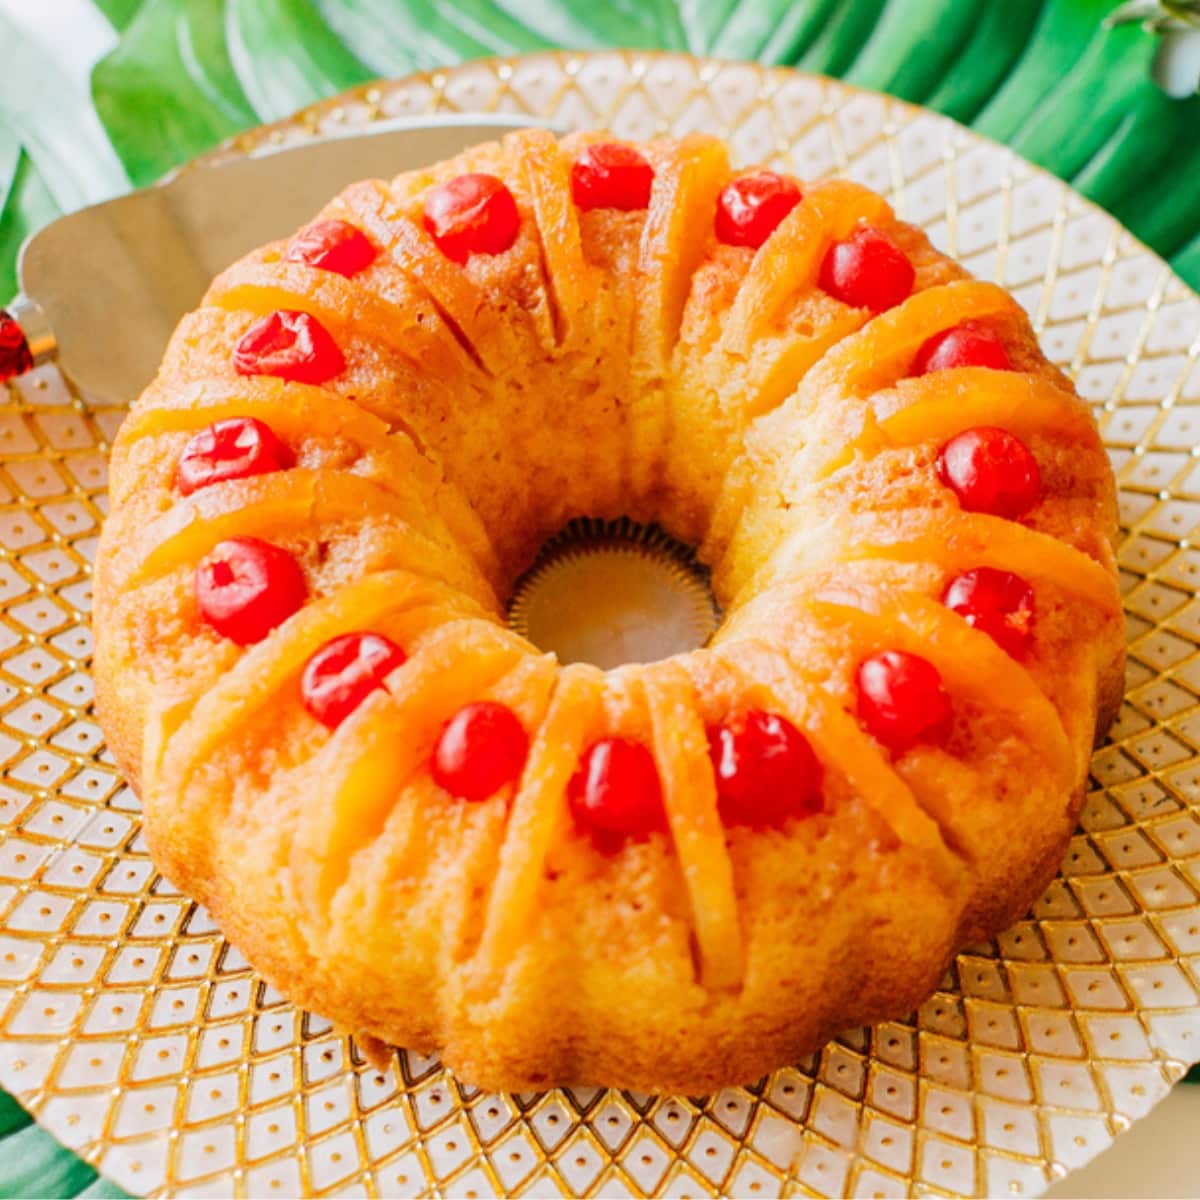 Homemade Pineapple Upside-Down Bundt Cake on a White and Gold-Patterned Serving Tray